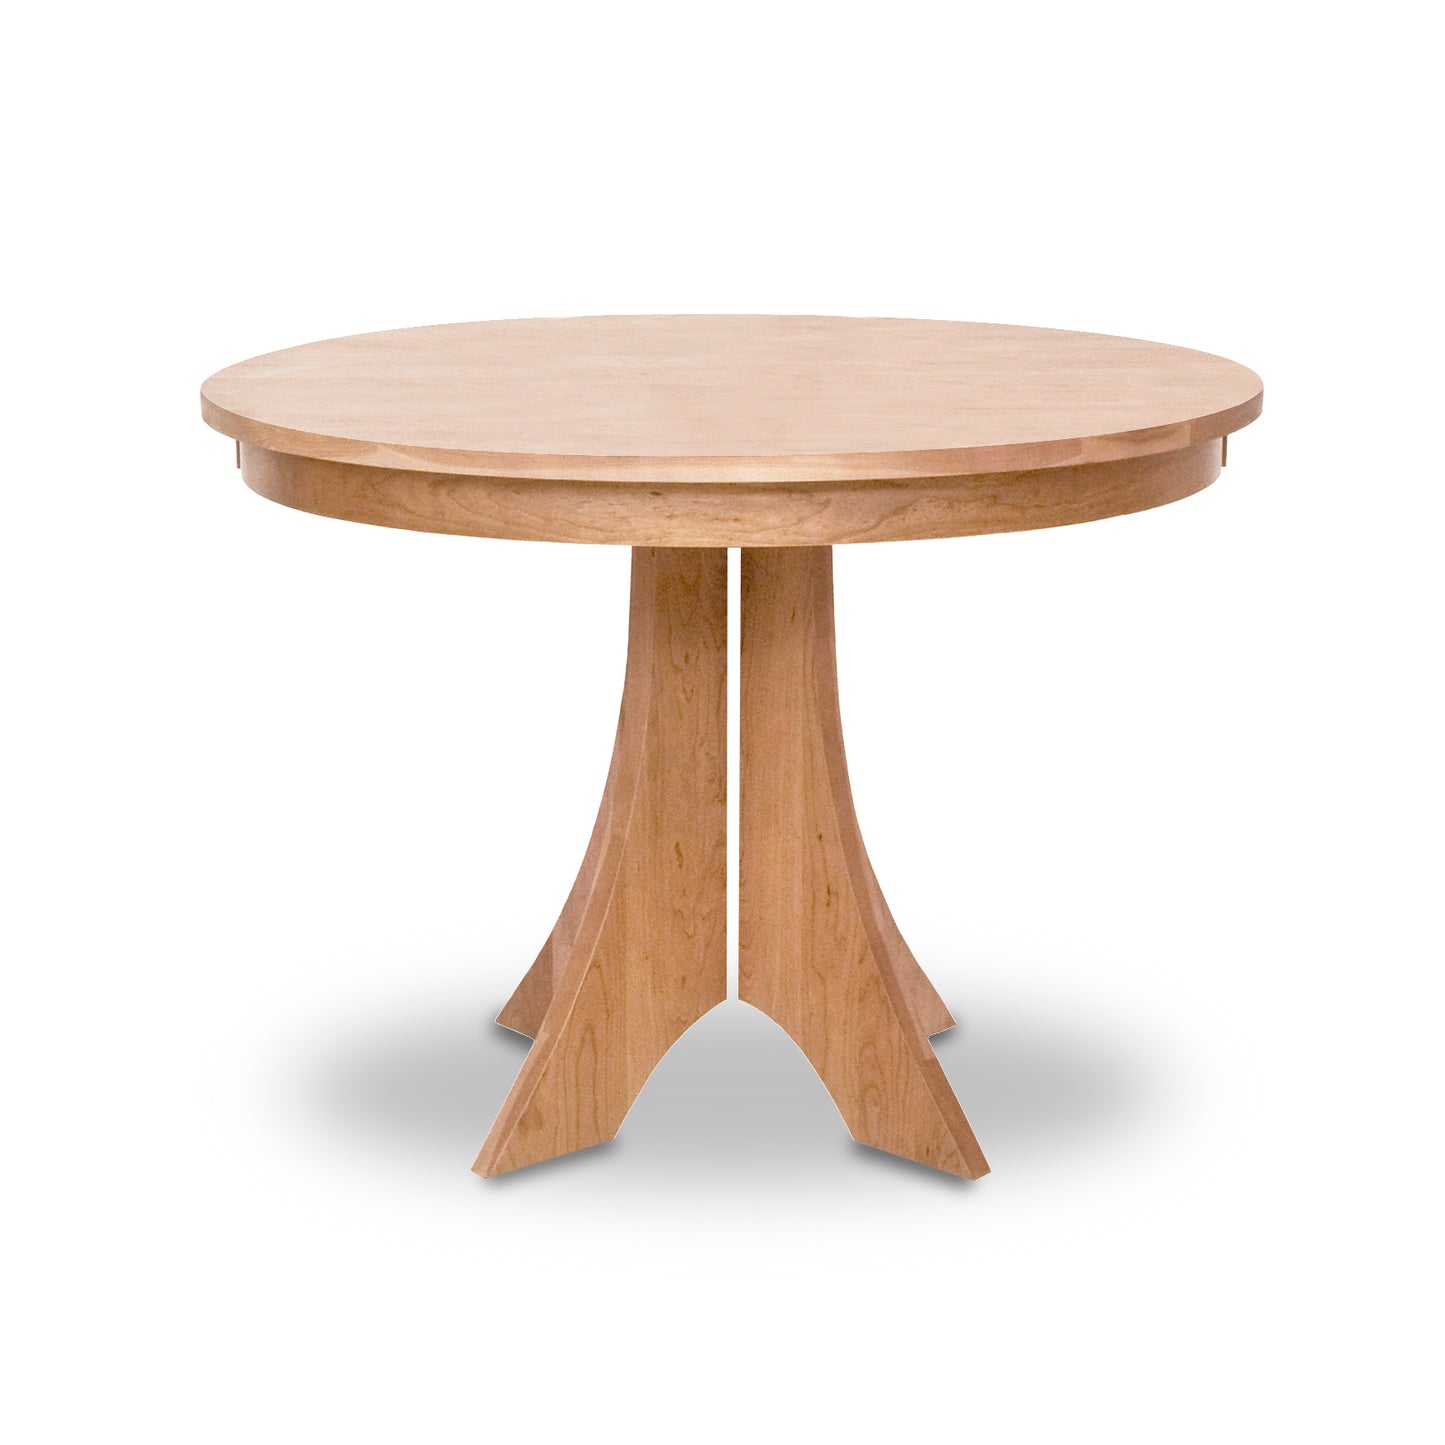 A sturdy Hampton Split Pedestal round dining table with a solid wood base from Lyndon Furniture.